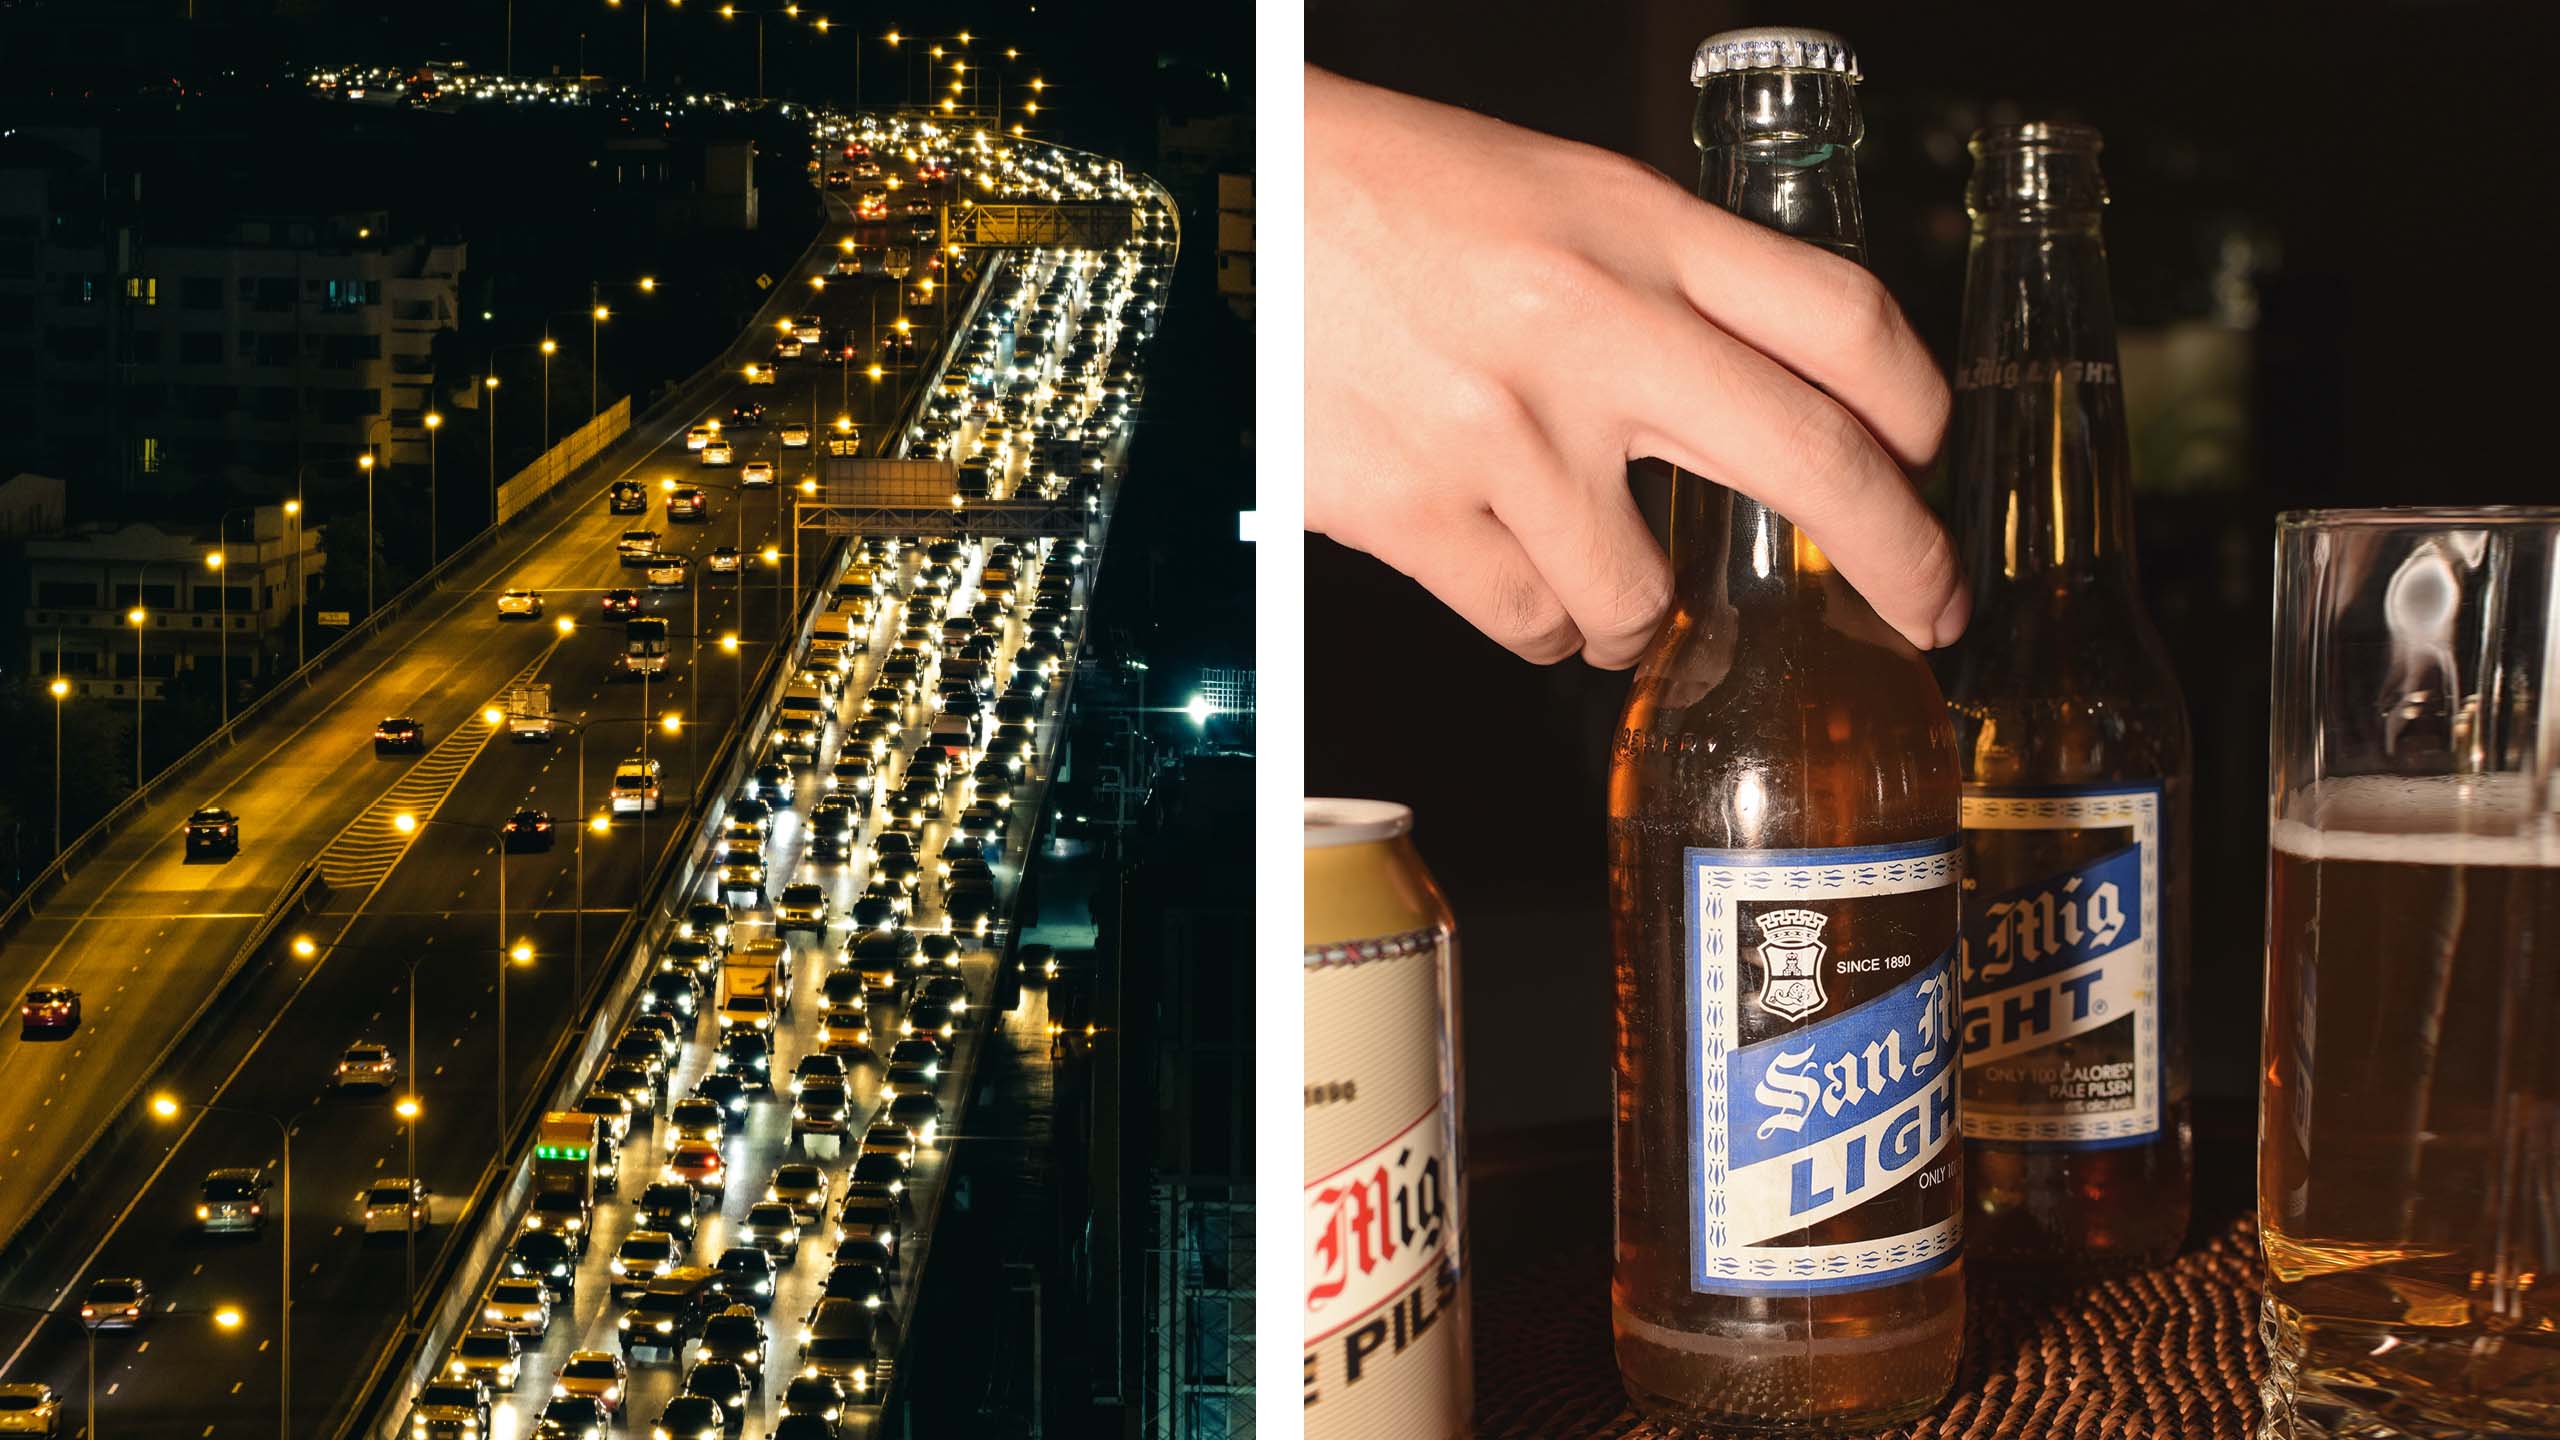 Photos of cars and traffic in EDSA and a hand grabbing a bottle of San Miguel Light beer